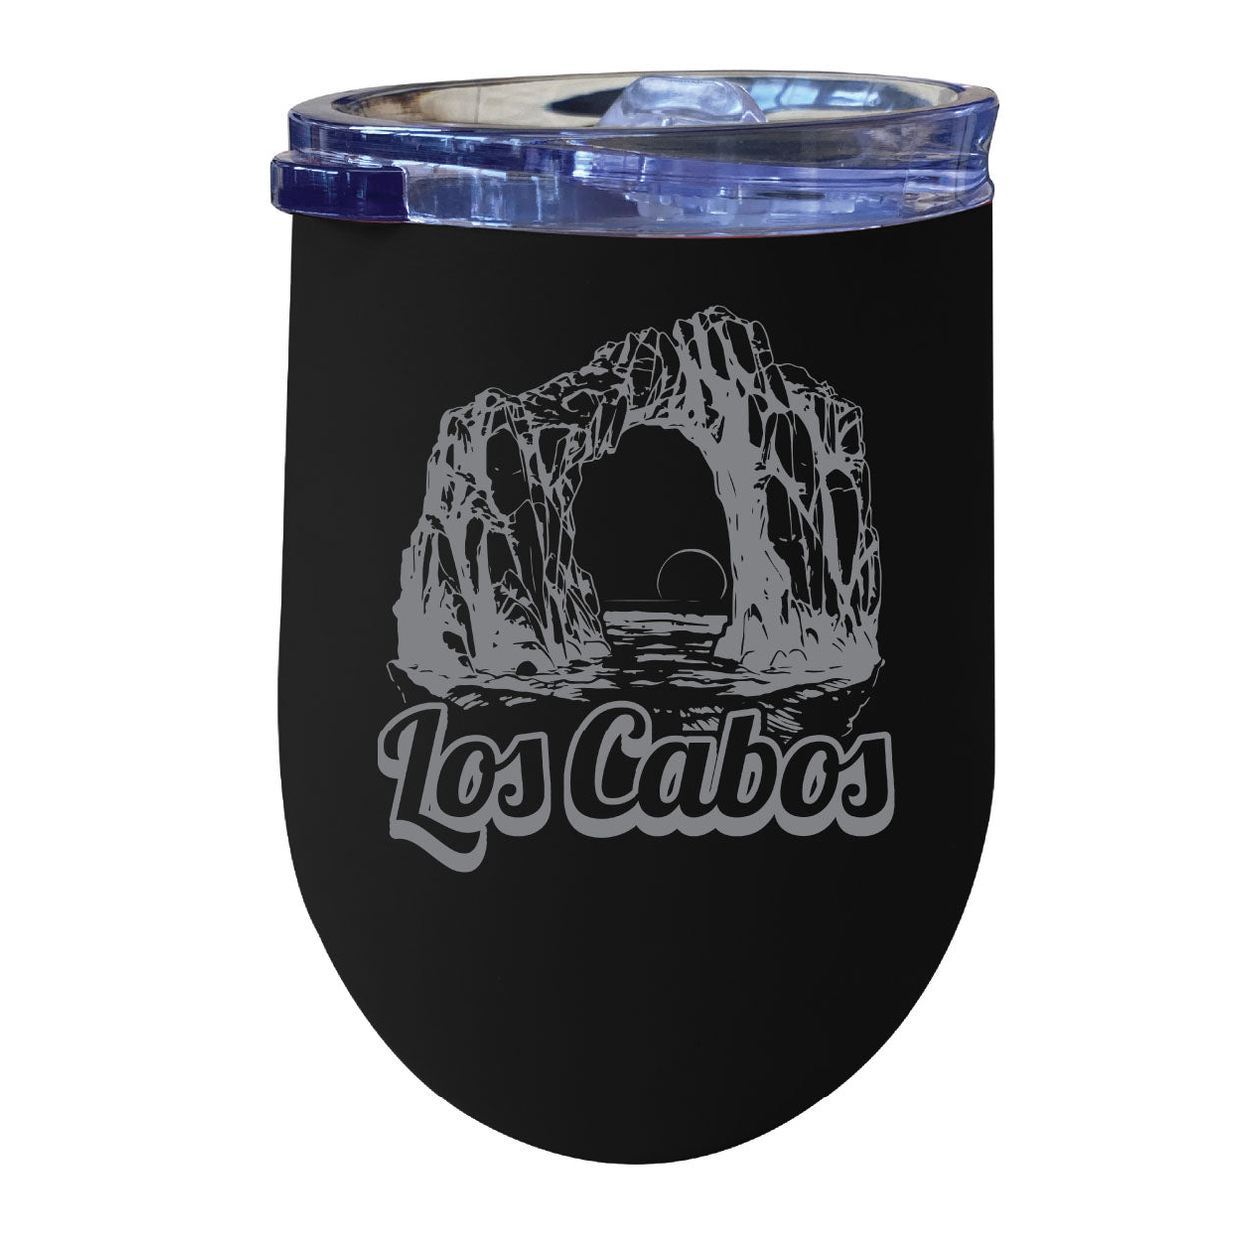 Los Cabos Mexico Souvenir 12 Oz Engraved Insulated Wine Stainless Steel Tumbler - Black,,Single Unit